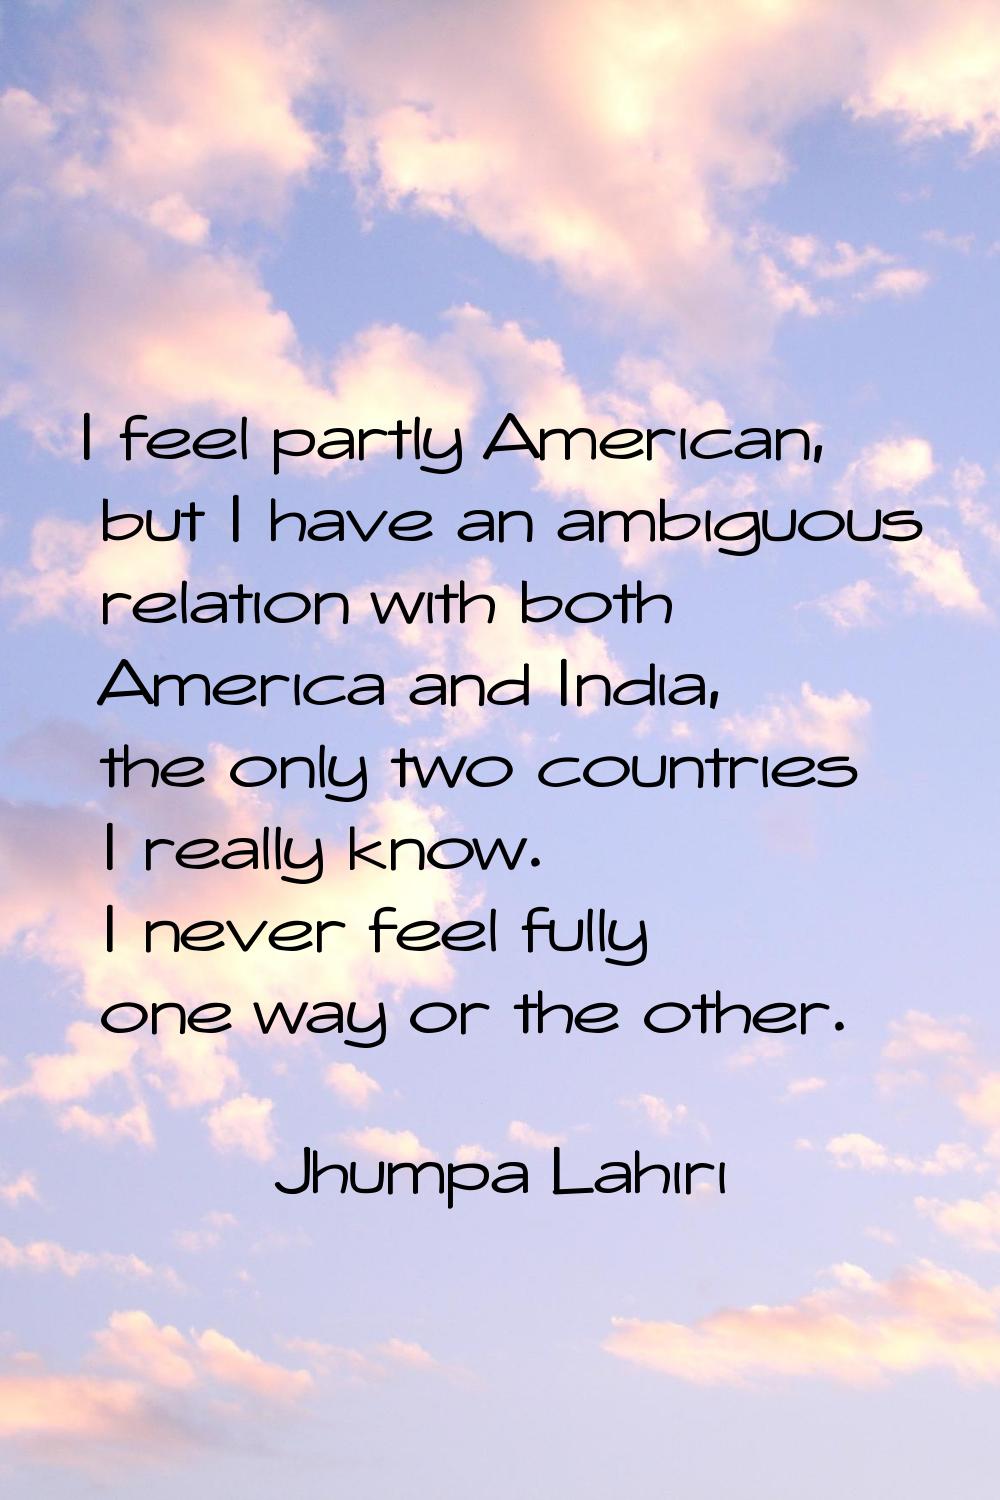 I feel partly American, but I have an ambiguous relation with both America and India, the only two 